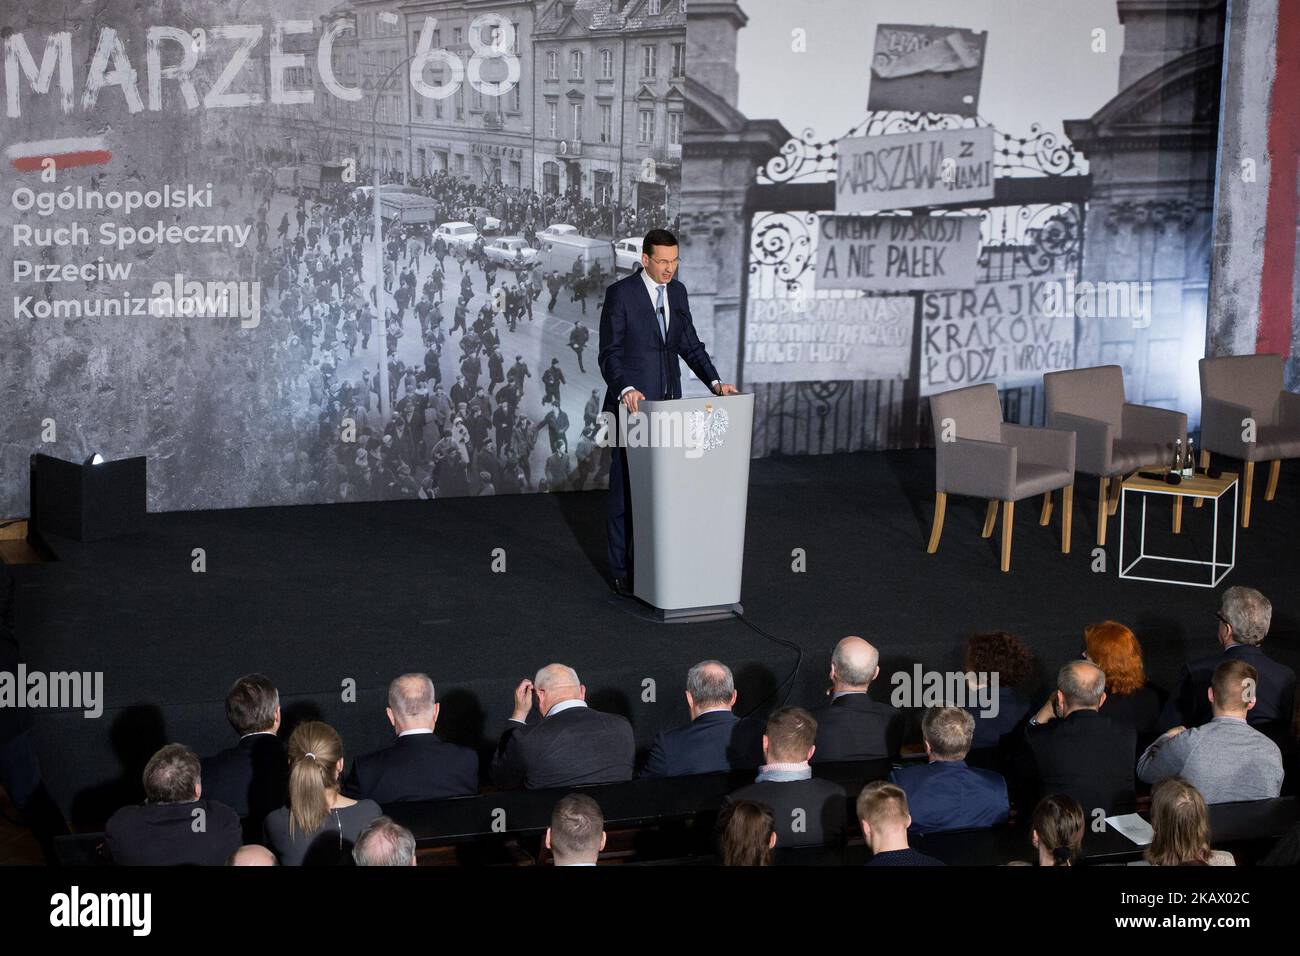 Prime Minister of Poland Mateusz Morawiecki during the debate about 'March 1968' (1968 Polish political crisis) at University of Warsaw, in Warsaw, Poland on 7 March 2018 (Photo by Mateusz Wlodarczyk/NurPhoto) Stock Photo